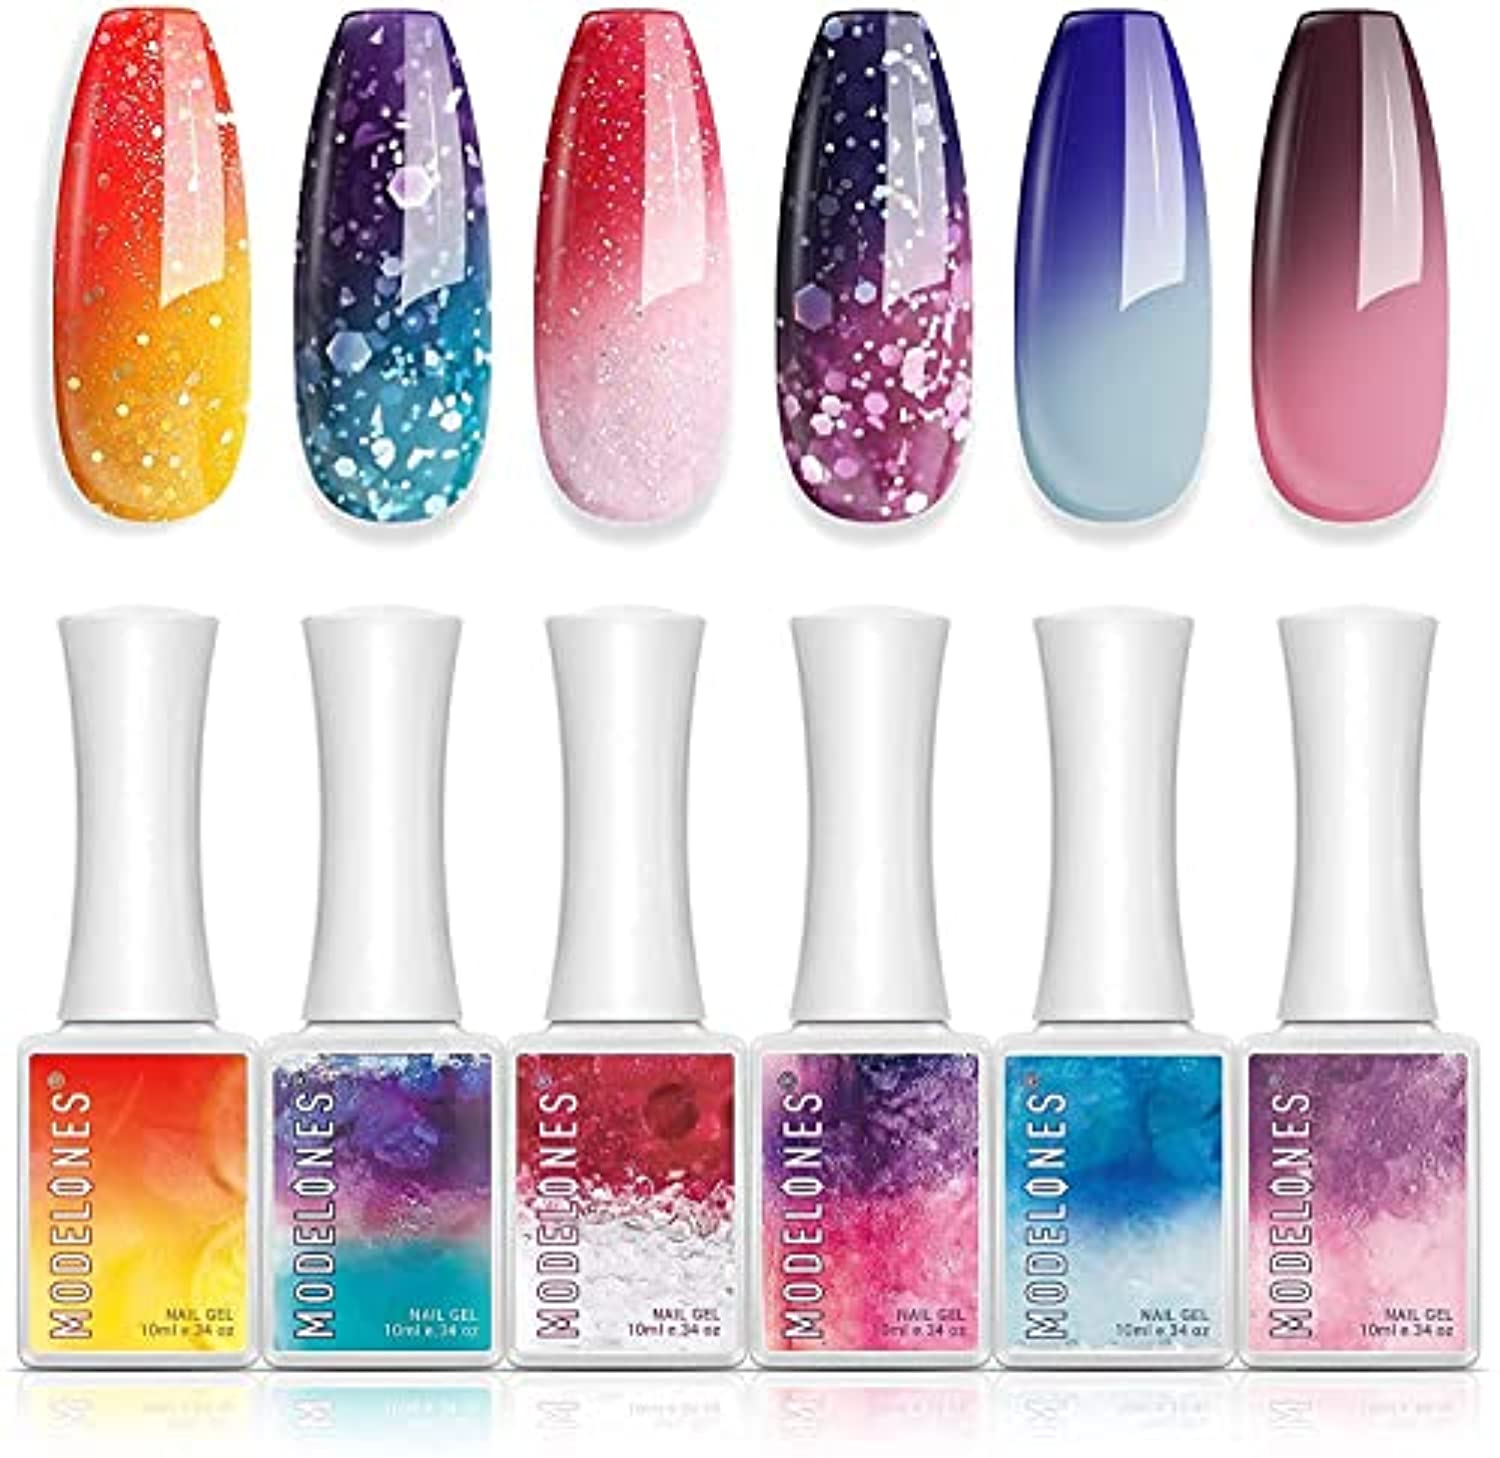 Modelones Nail Tips and Glue Gel Nail Kit with 6 Colors Mood Temperature Color Changing Gel Polish 10 ML